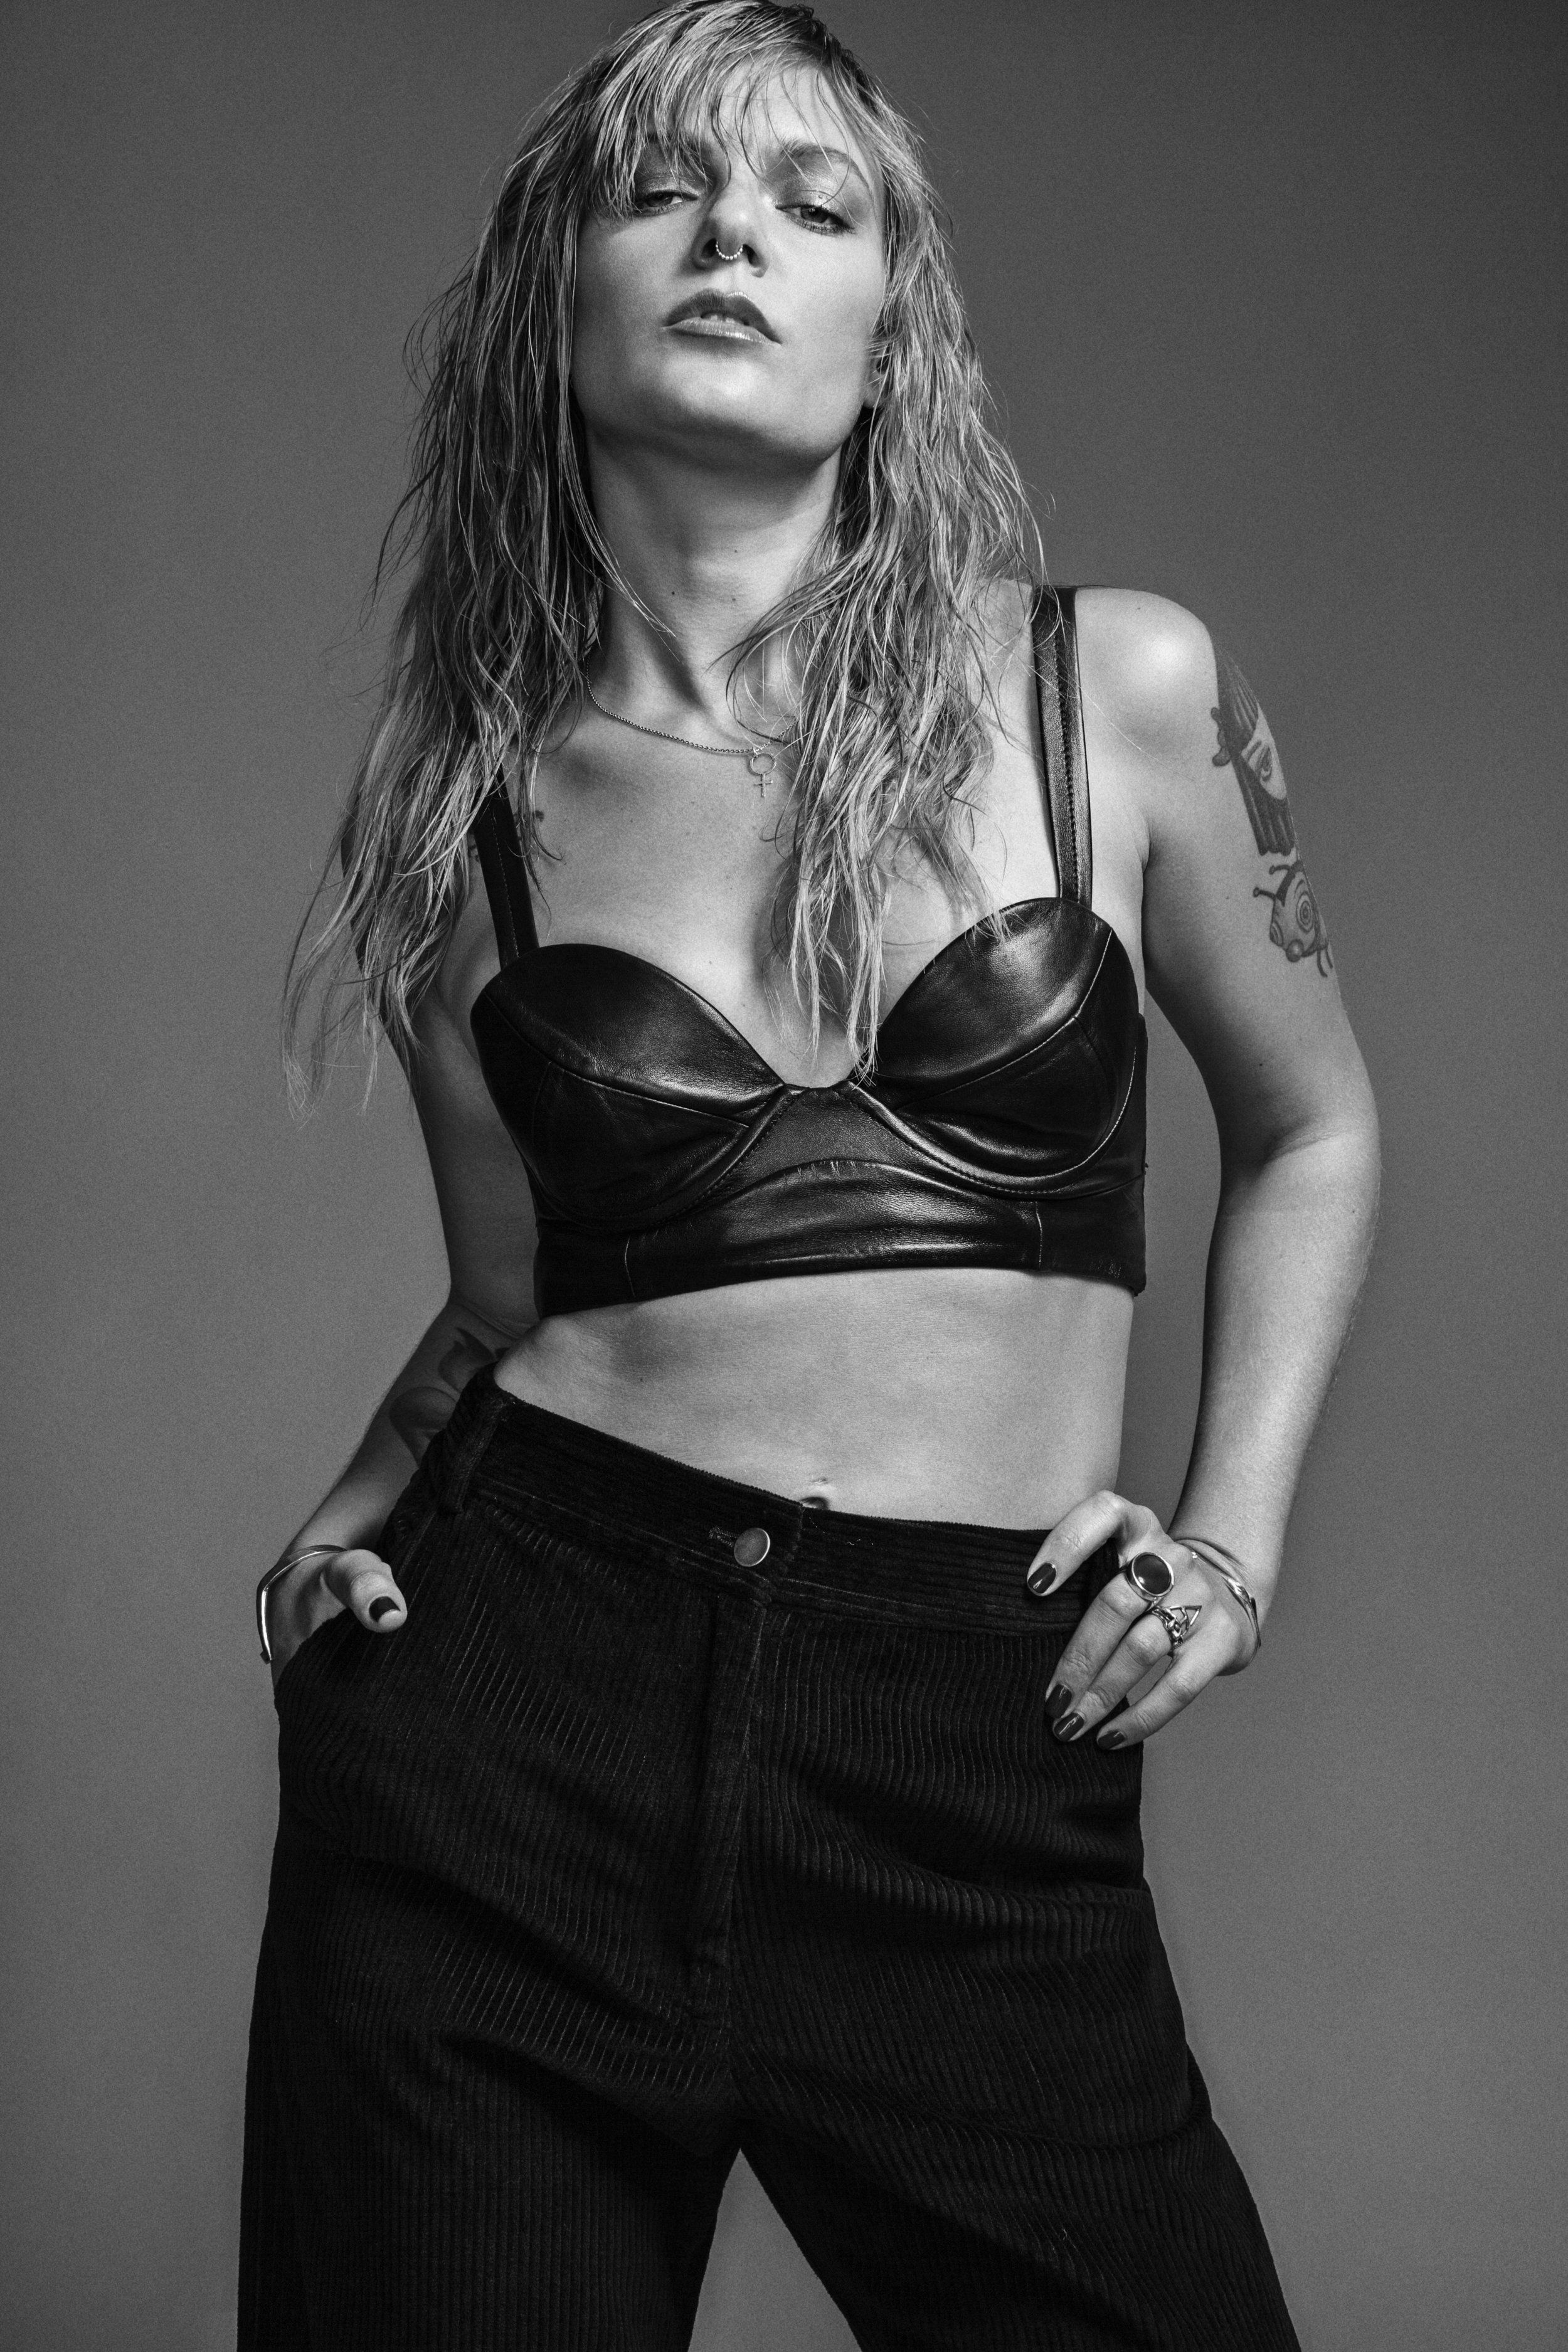 Tove lo foto in topless
 #79600562